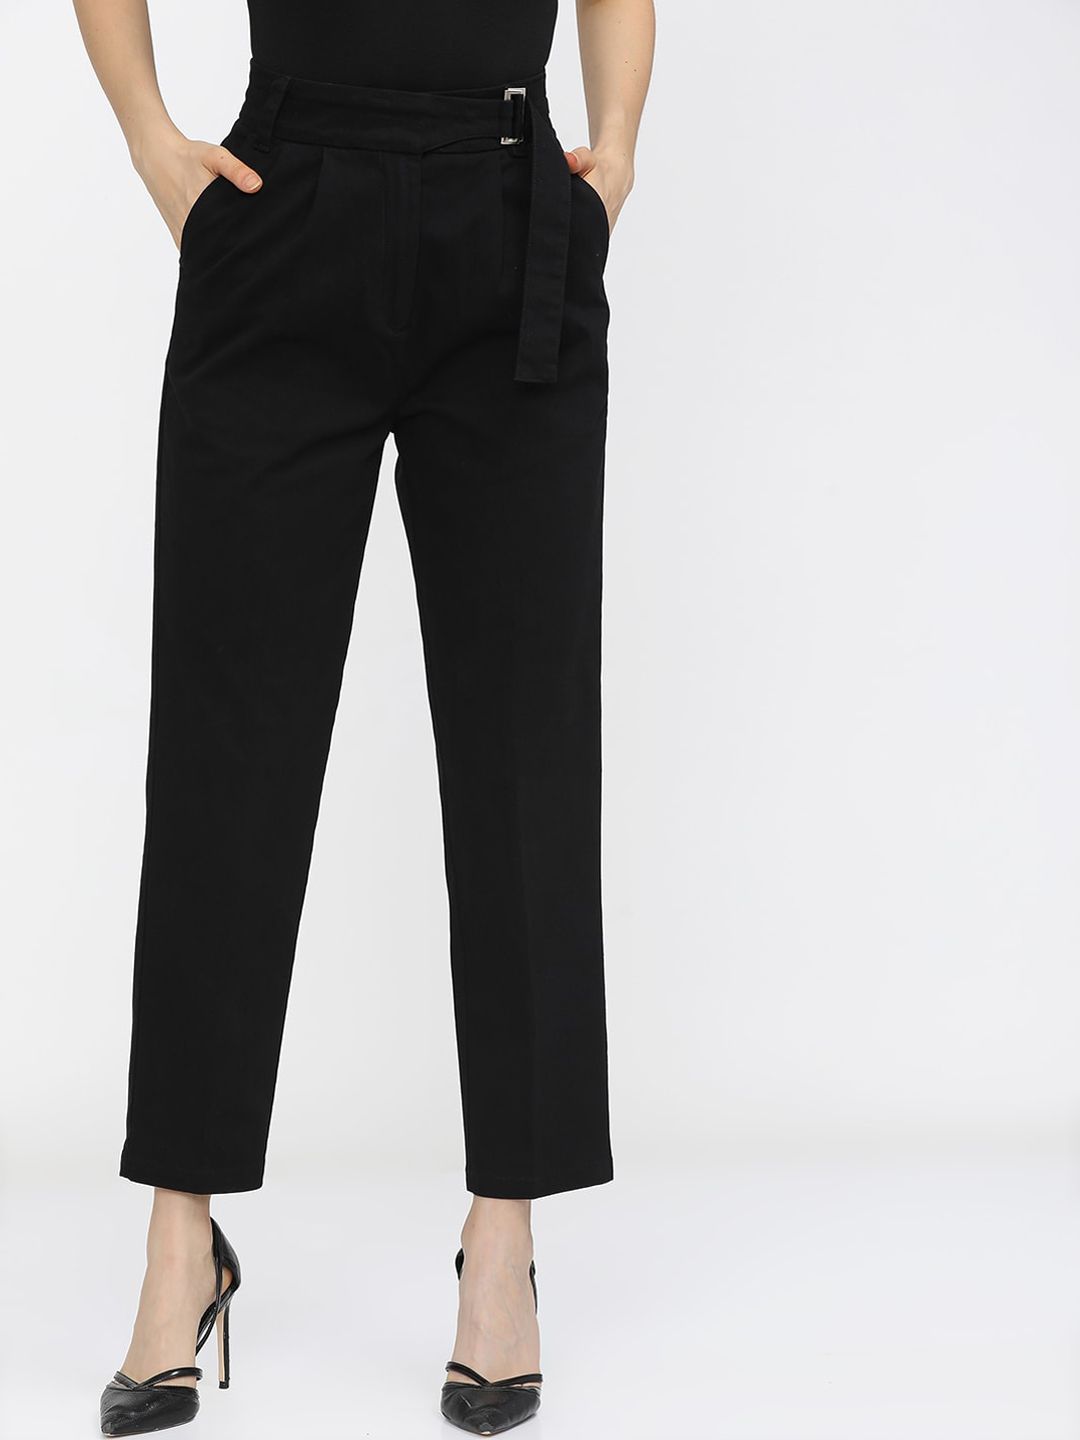 Tokyo Talkies Women Black Tapered Fit Pleated Peg Trousers Price in India